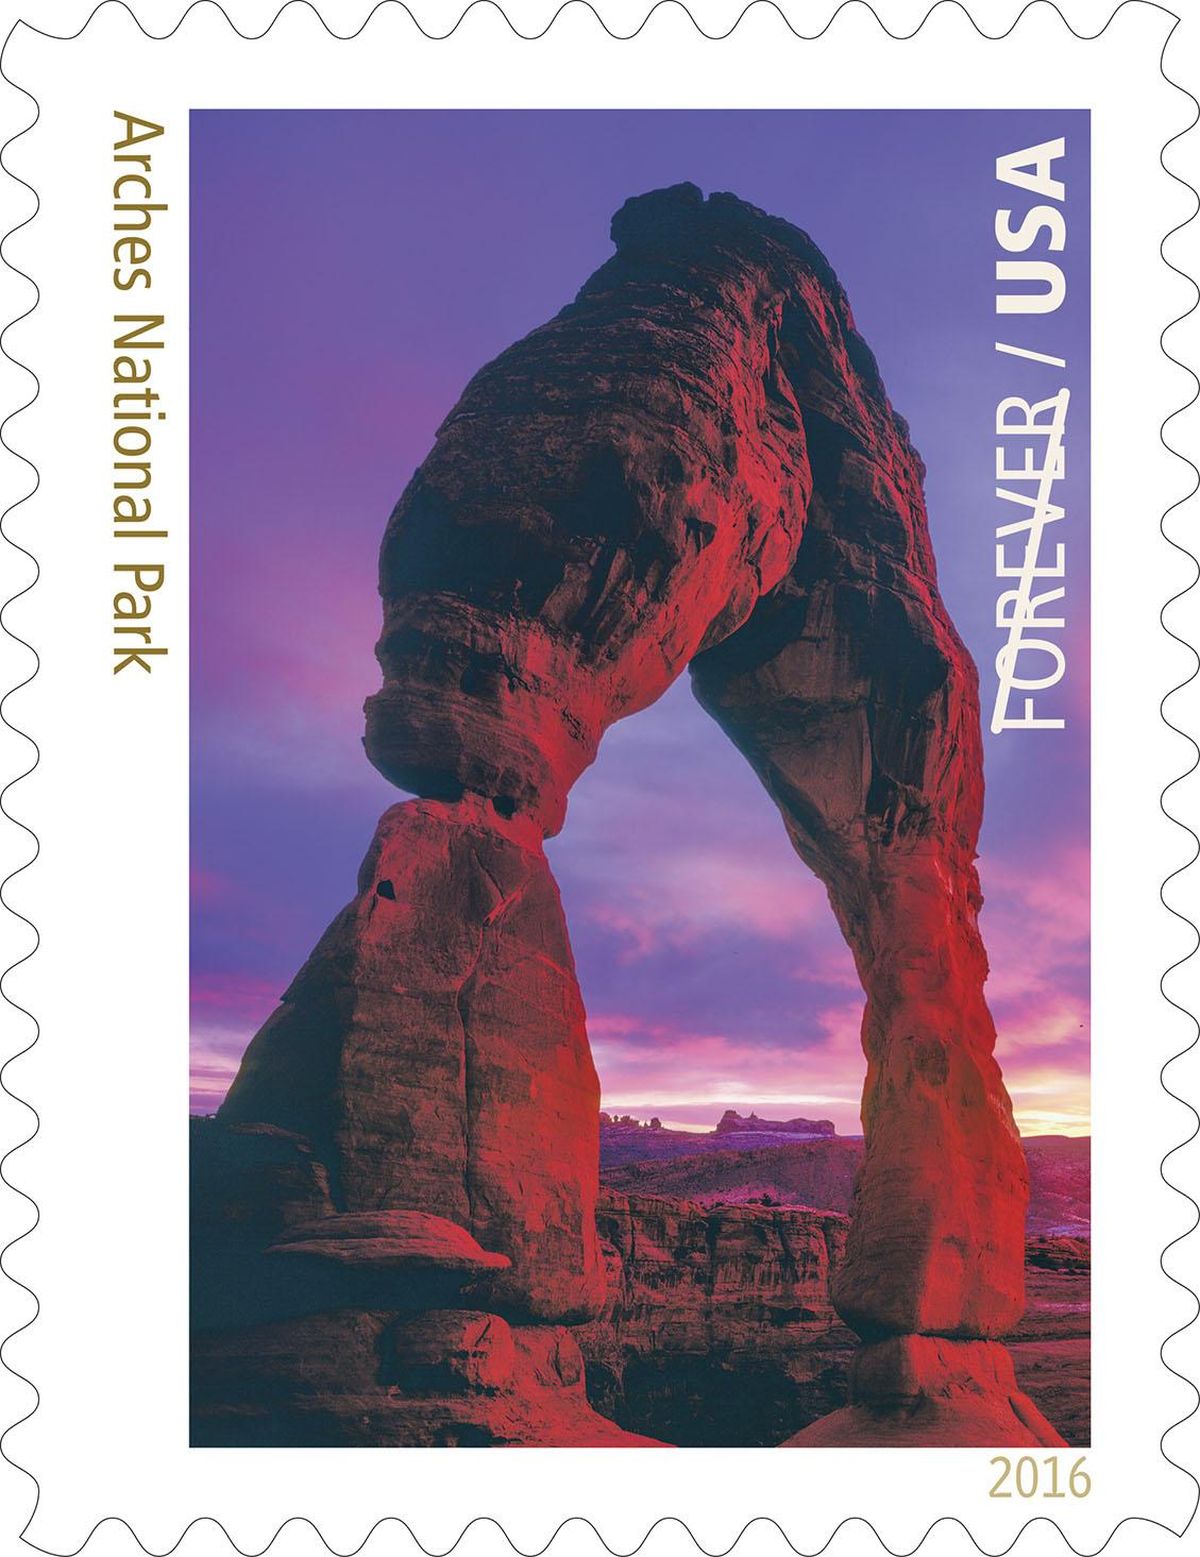 A photo of Delicate Arch Arches National Park by Tom Till of Moab, Utah, is one of 16 images to be featured on a series of U.S. Postal Service Forever Stamps celebrating the 100 anniversary of the National Park System. The stamps will be issued in June. (Courtesy photo)